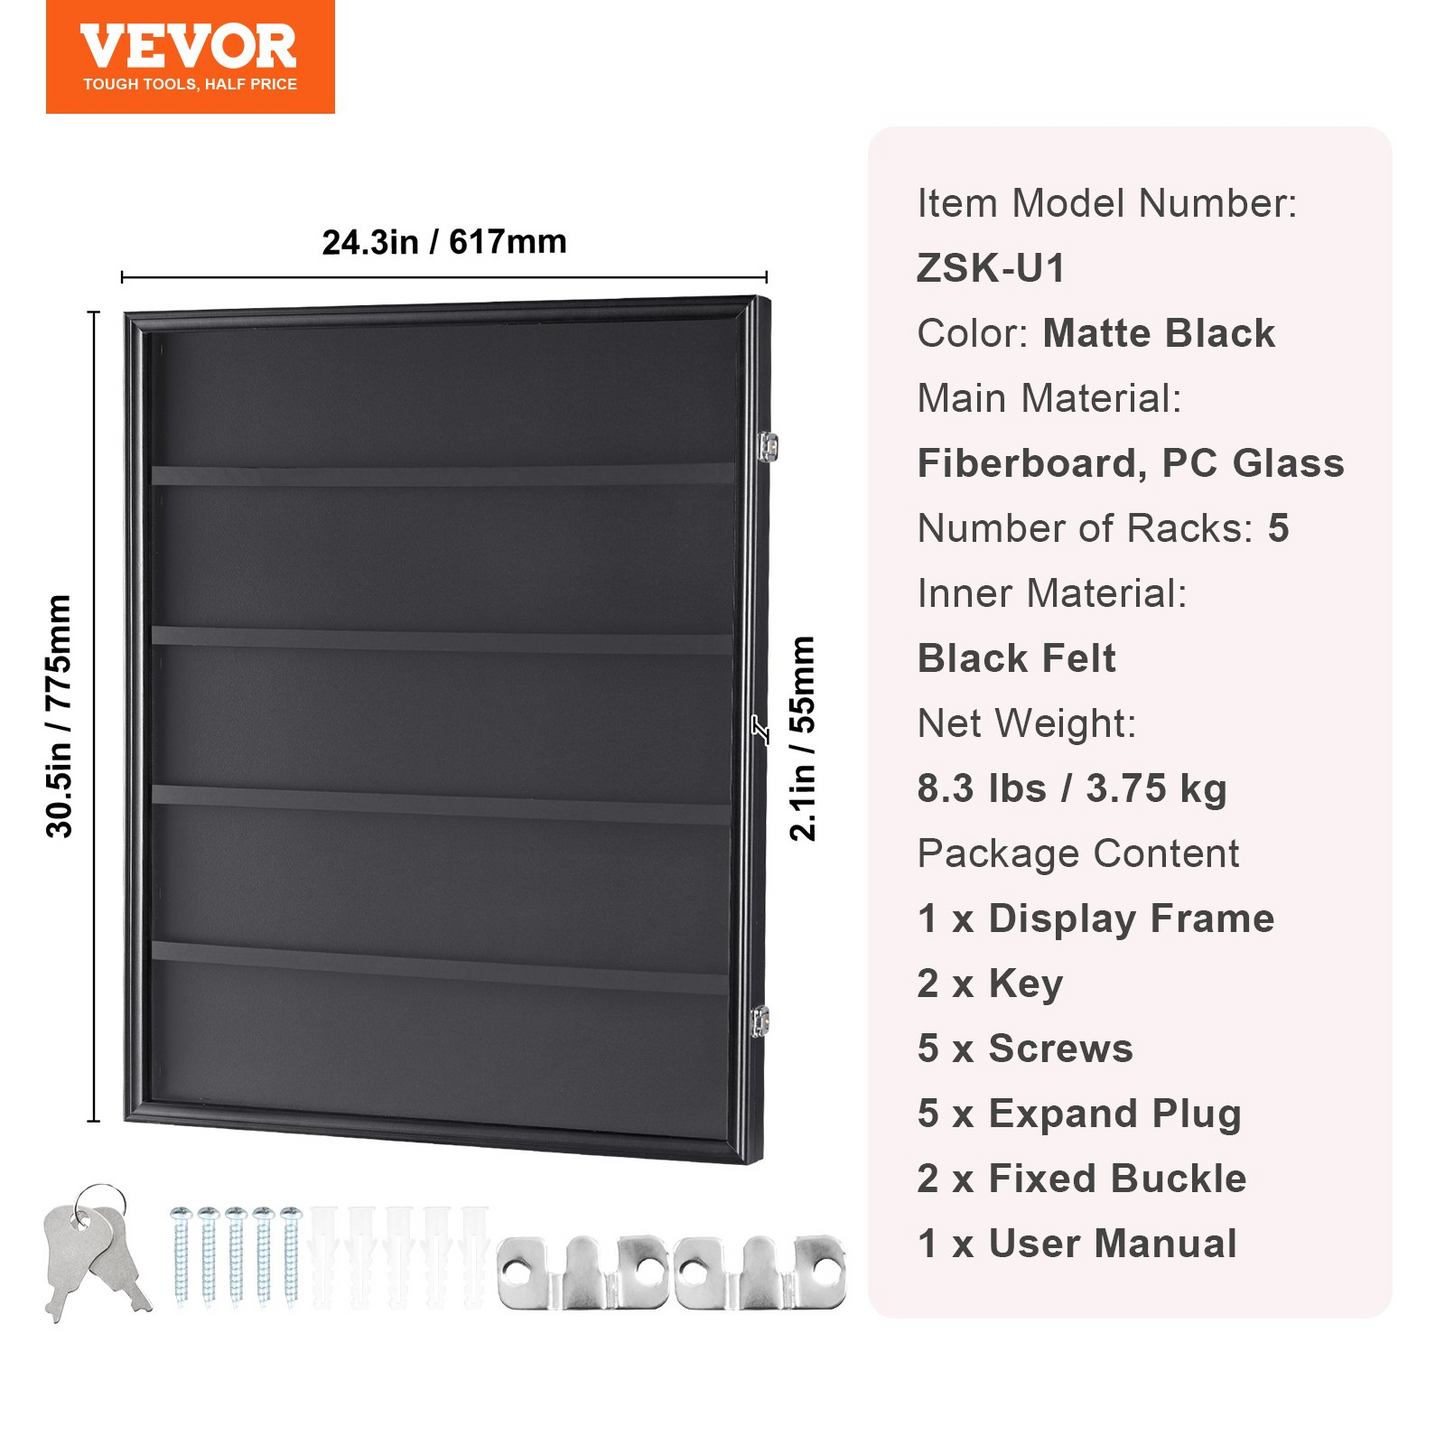 VEVOR 35 Graded Sports Card Display Case, 24.3x30.5x2.1 in, Baseball Card Display Frame with 98% UV Protection Clear View PC Glass, Lockable Wall Cabinet for Football Basketball Hockey Trading Card, Goodies N Stuff